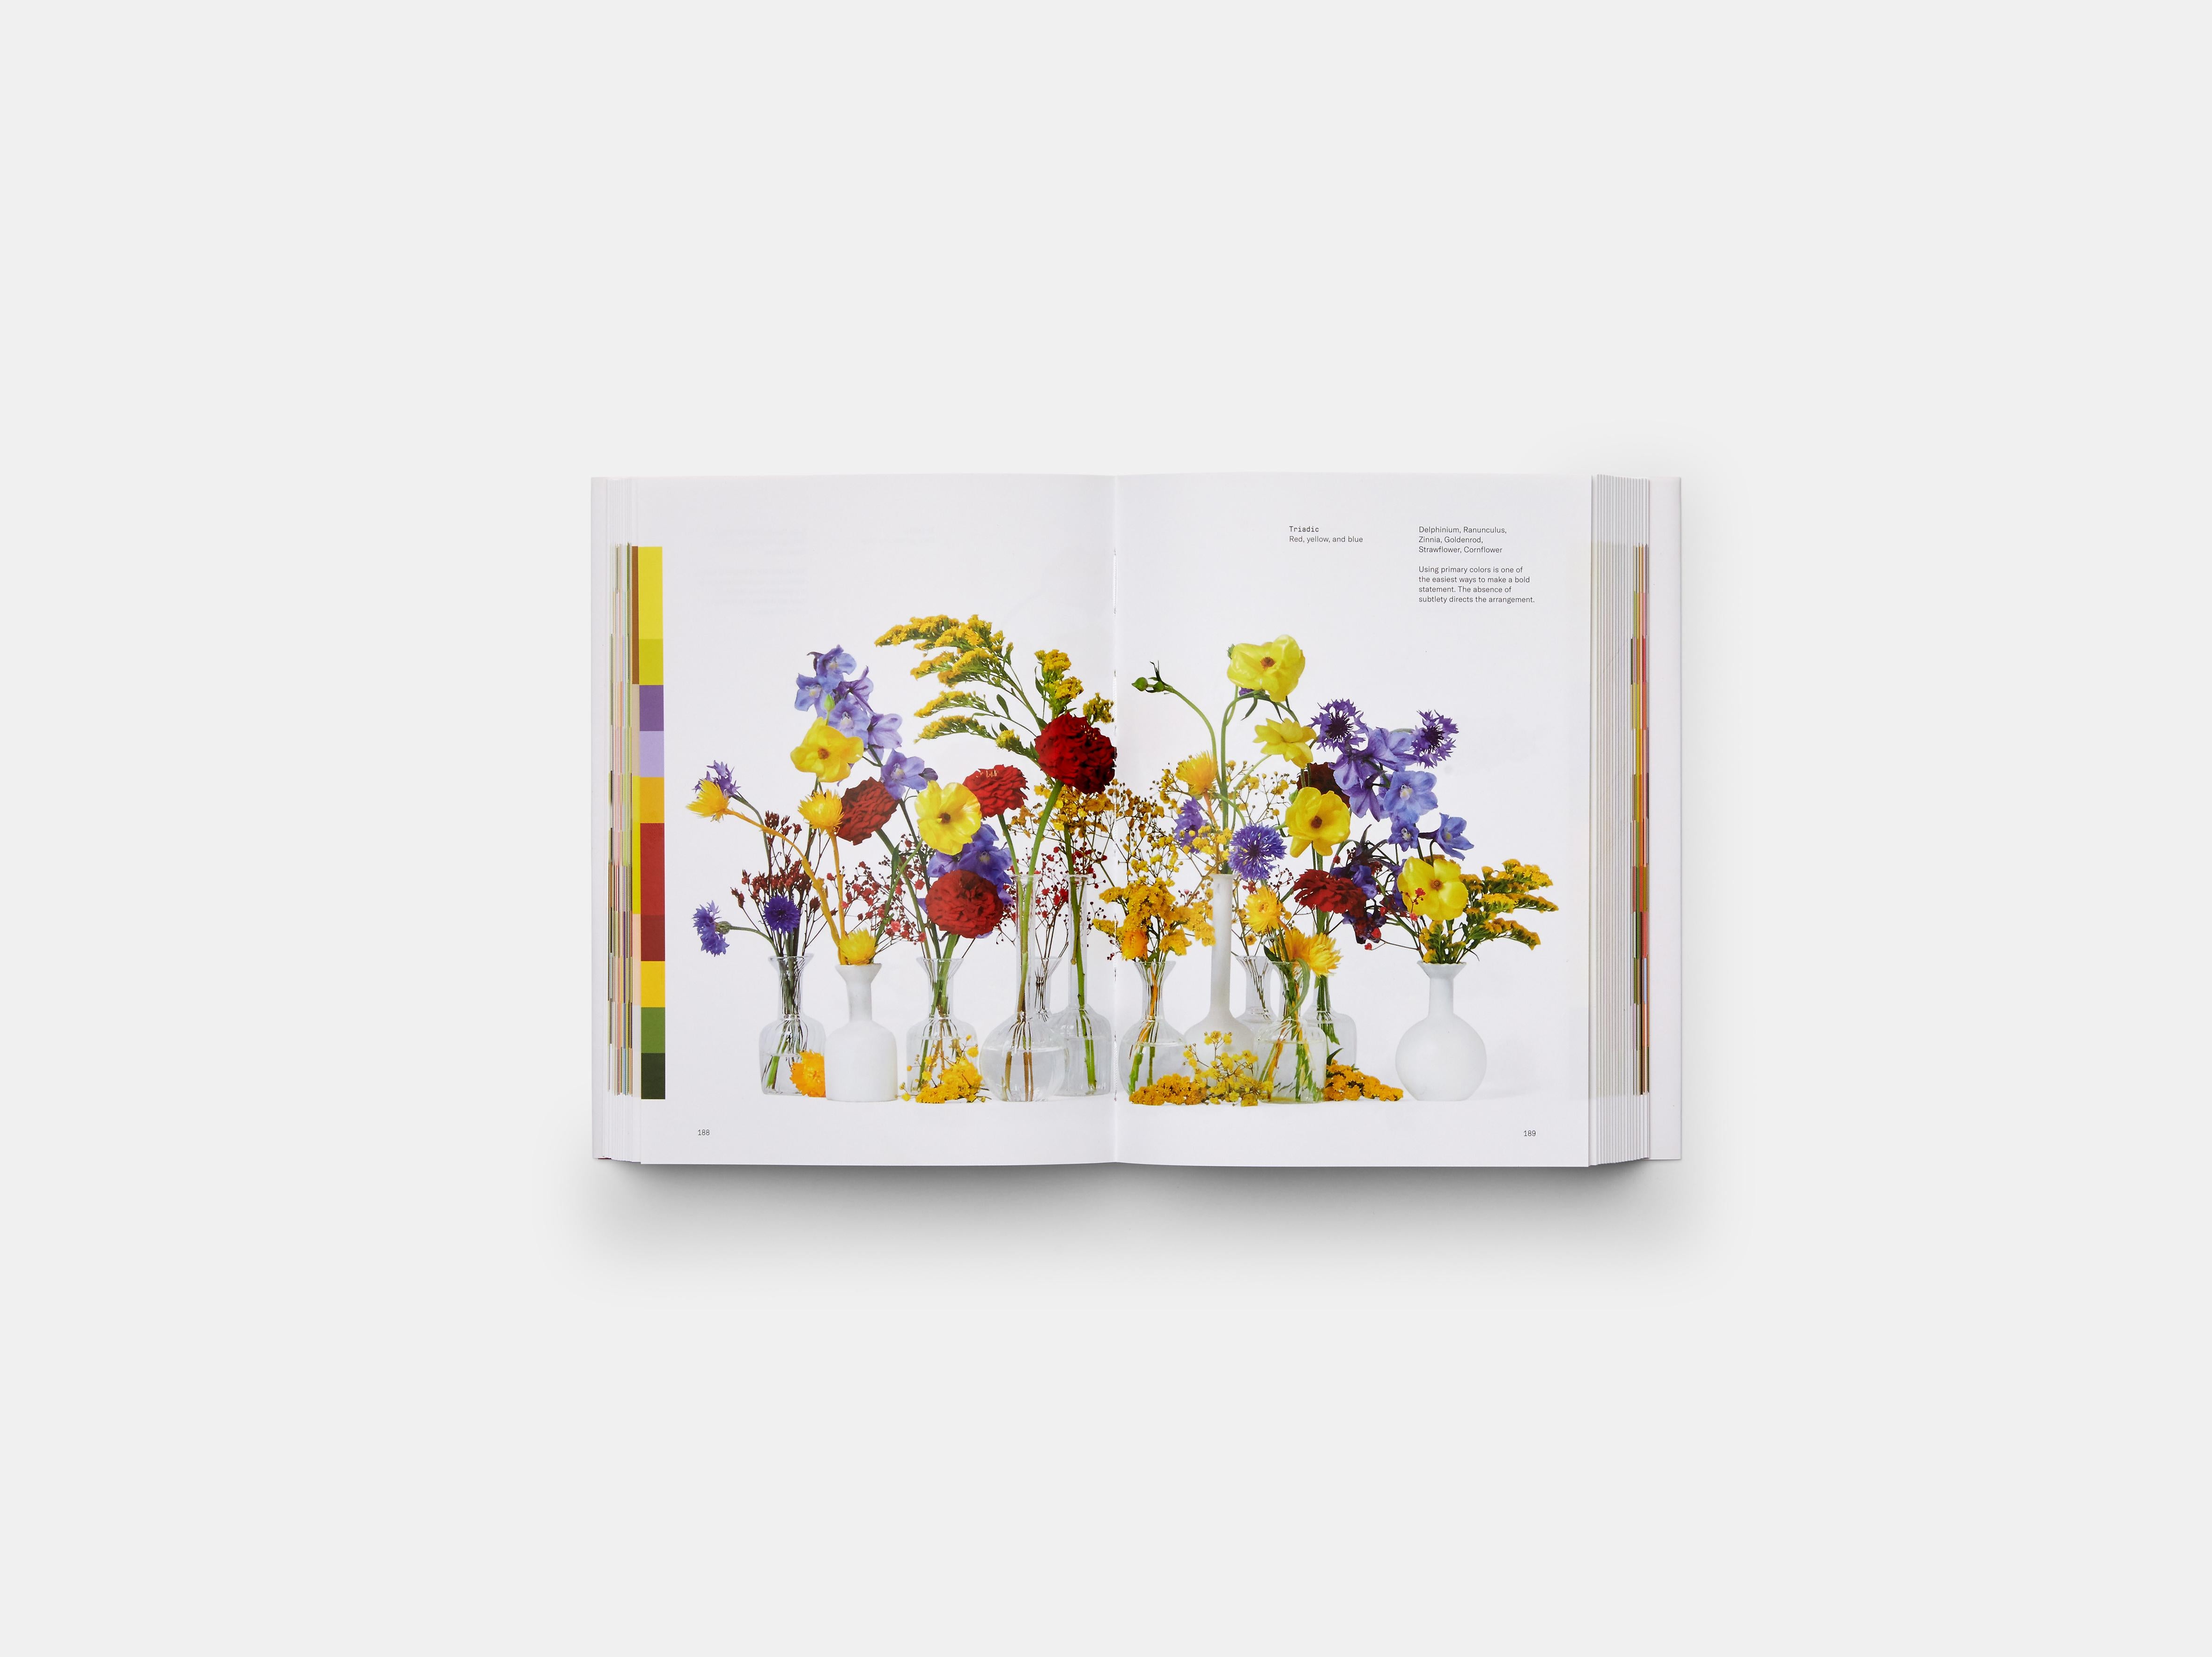 Leading floral designers Putnam & Putnam are back - now with the ultimate flower-arrangement reference book

The follow-up to Darroch and Michael Putnam's acclaimed bestselling debut, Flower Color Theory is the only guide that uses color theory as